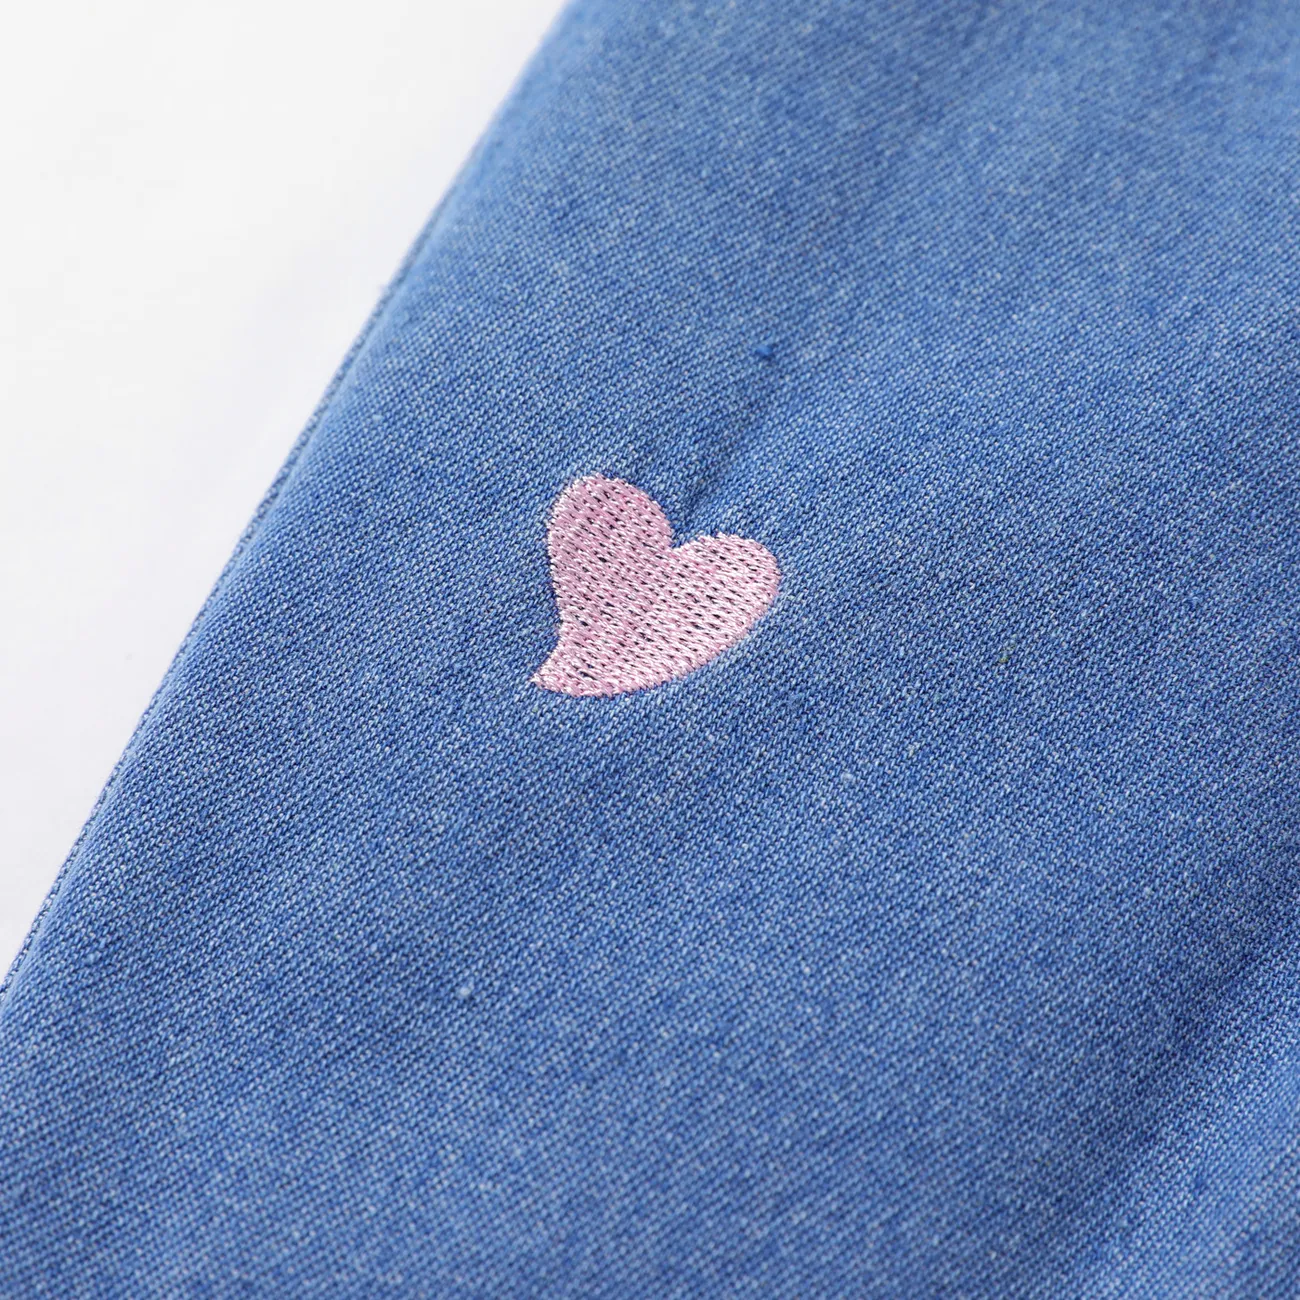 Baby Girl 100% Cotton Heart Embroidered Denim Pants Jeans Blue big image 1